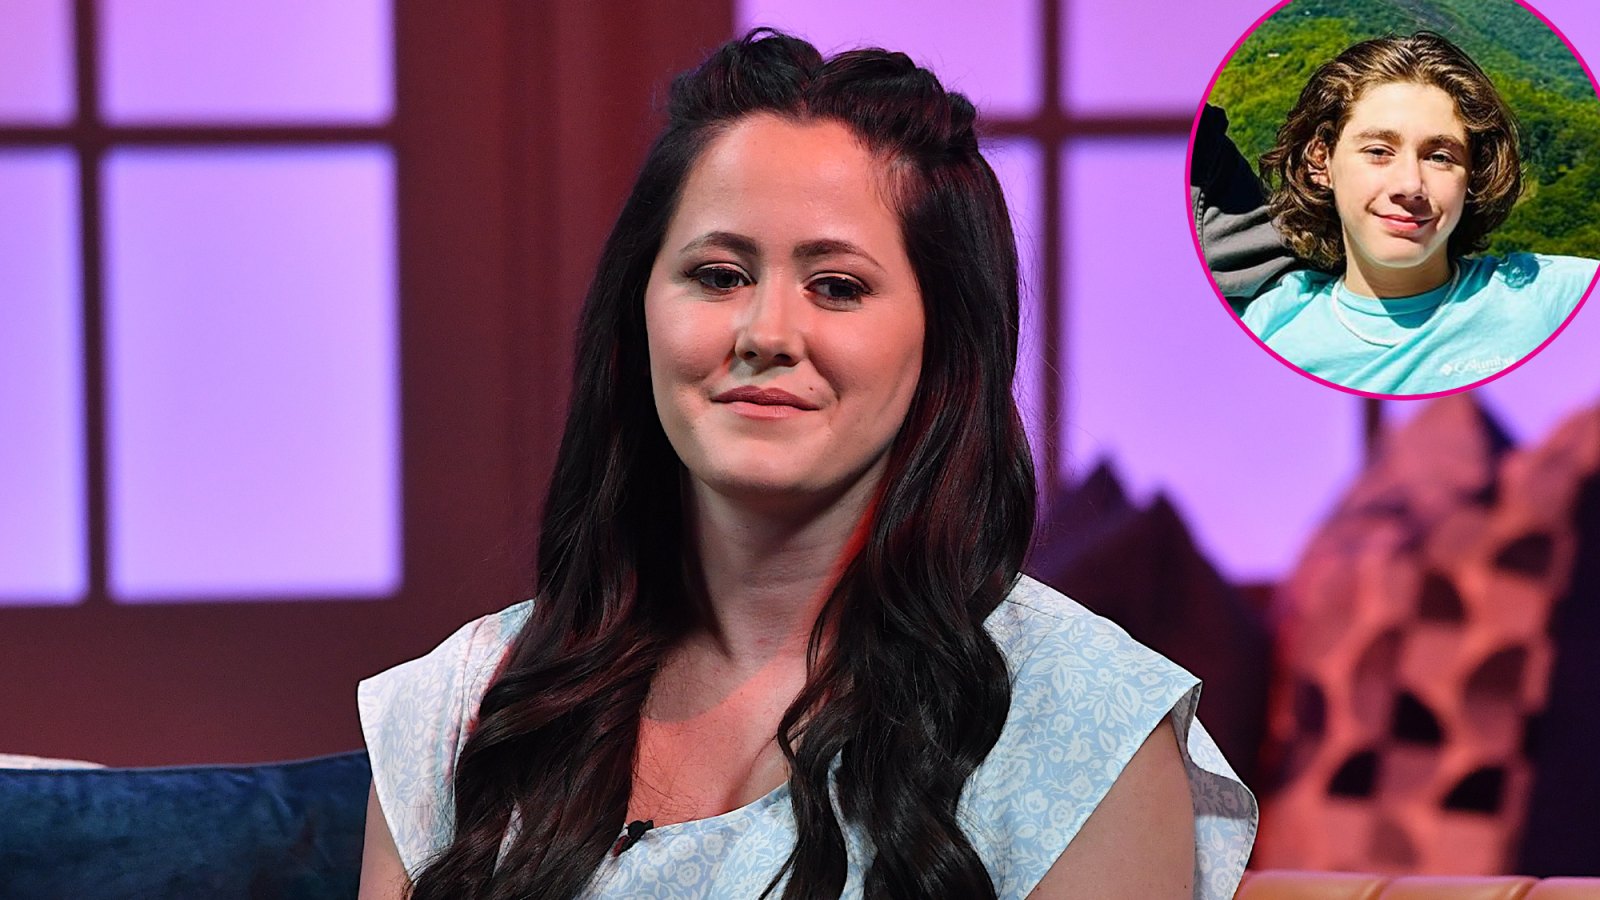 Teen Mom 2s Jenelle Evans Son Jace Says He Ran Away Due to Physical Abuse